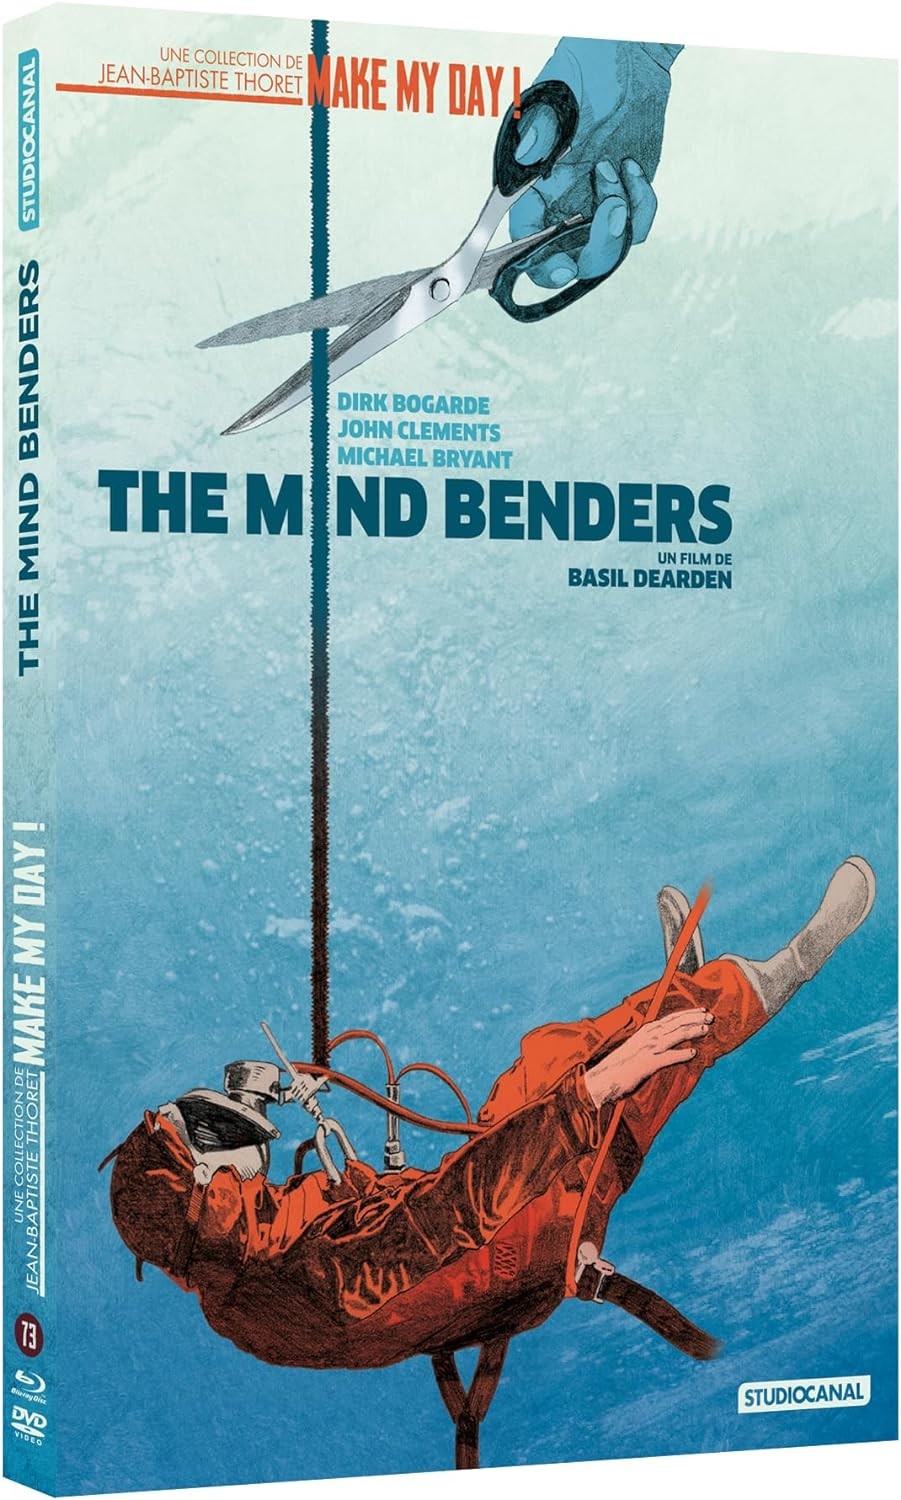 MMD 73 : THE MIND BENDERS - COMBO DVD + BD